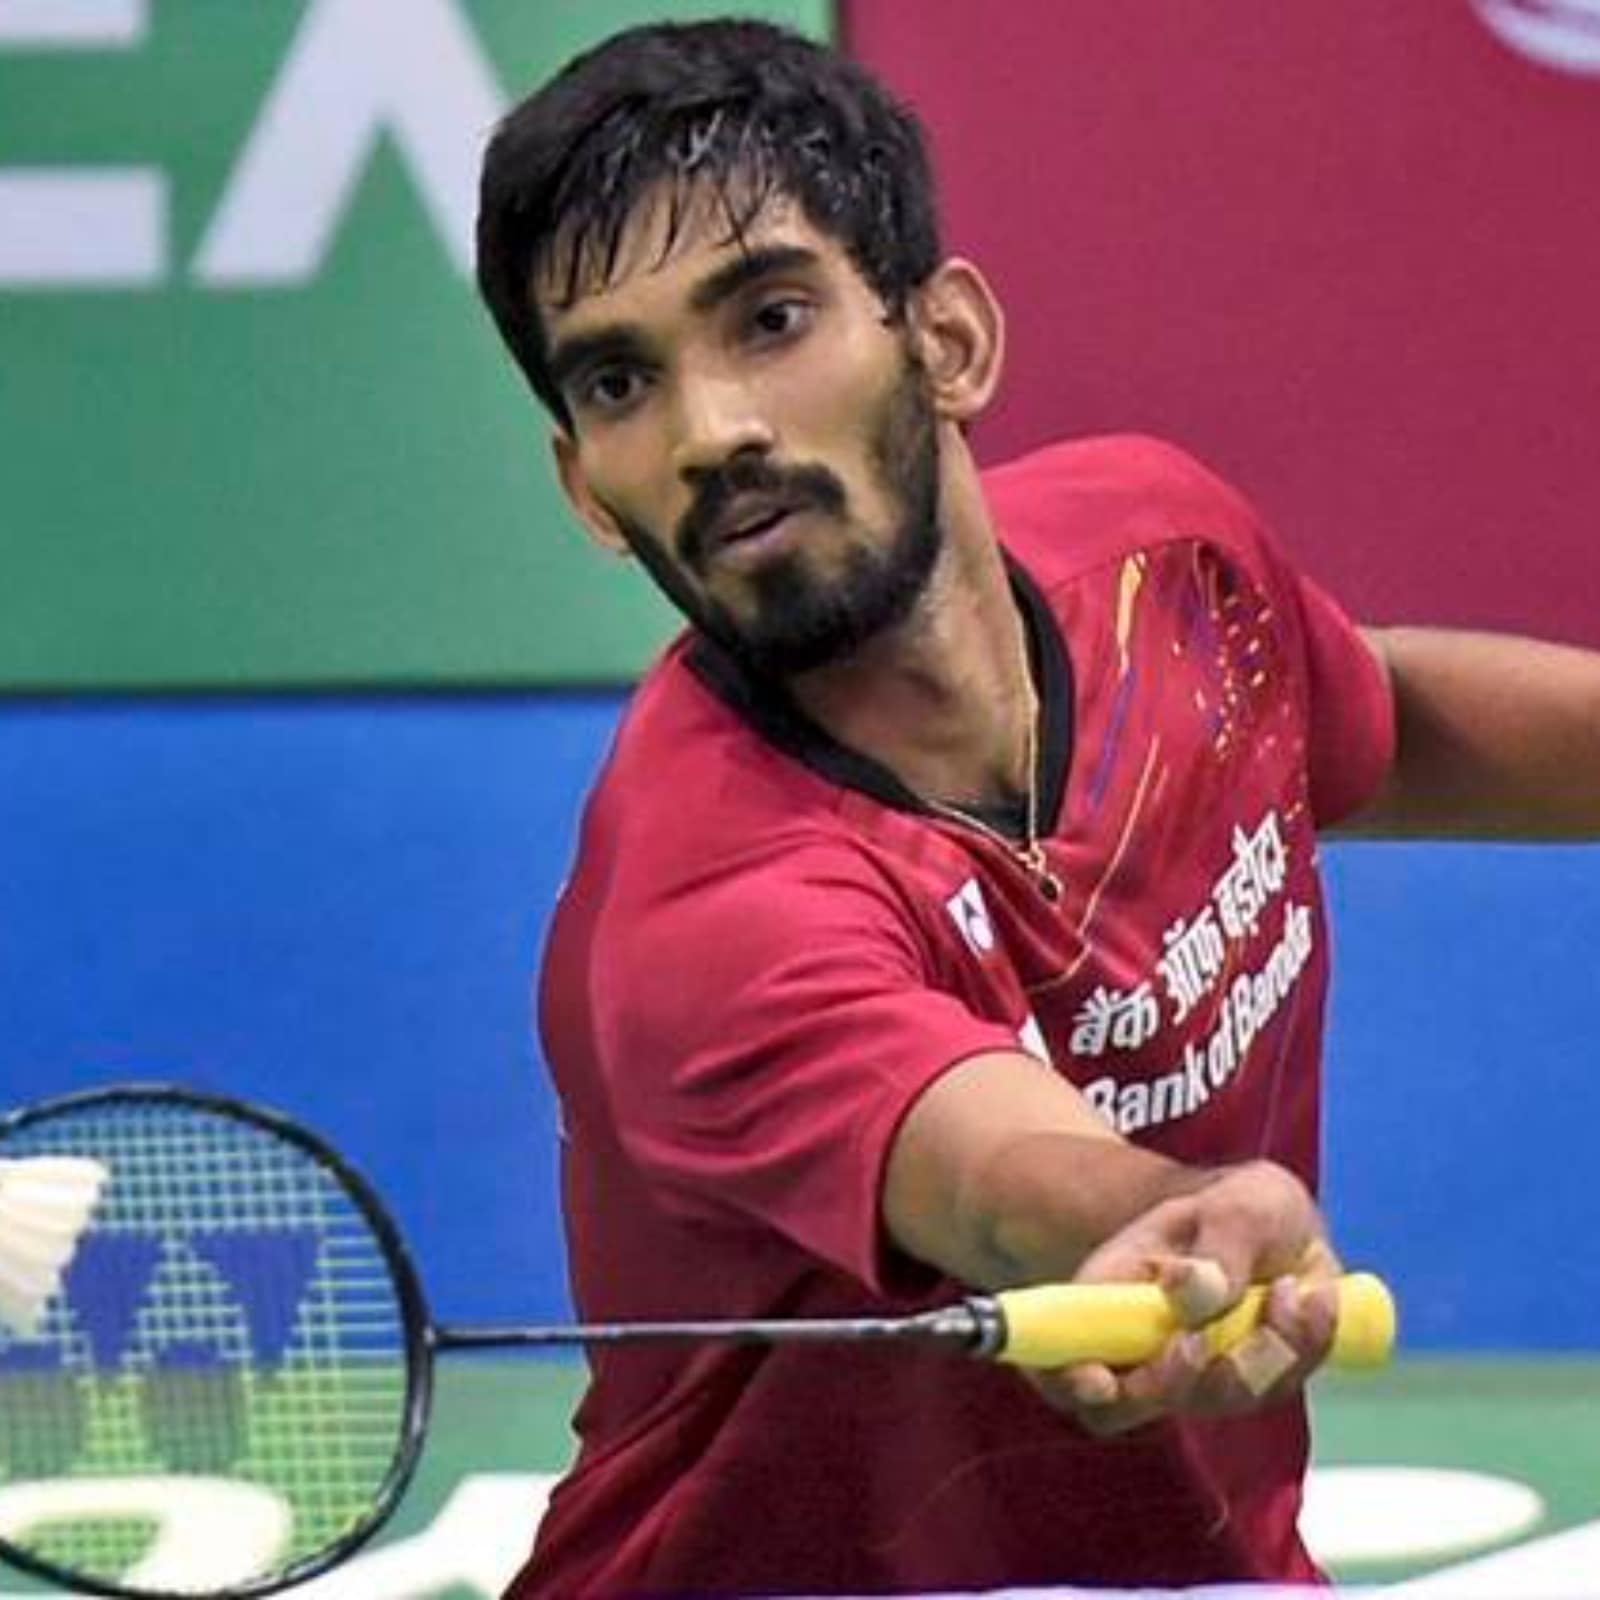 BWF World Championships 2021 Final Kidambi Srikanth vs Kean Yew Loh, Live Streaming Details How to Stream Online And Watch on TV in India